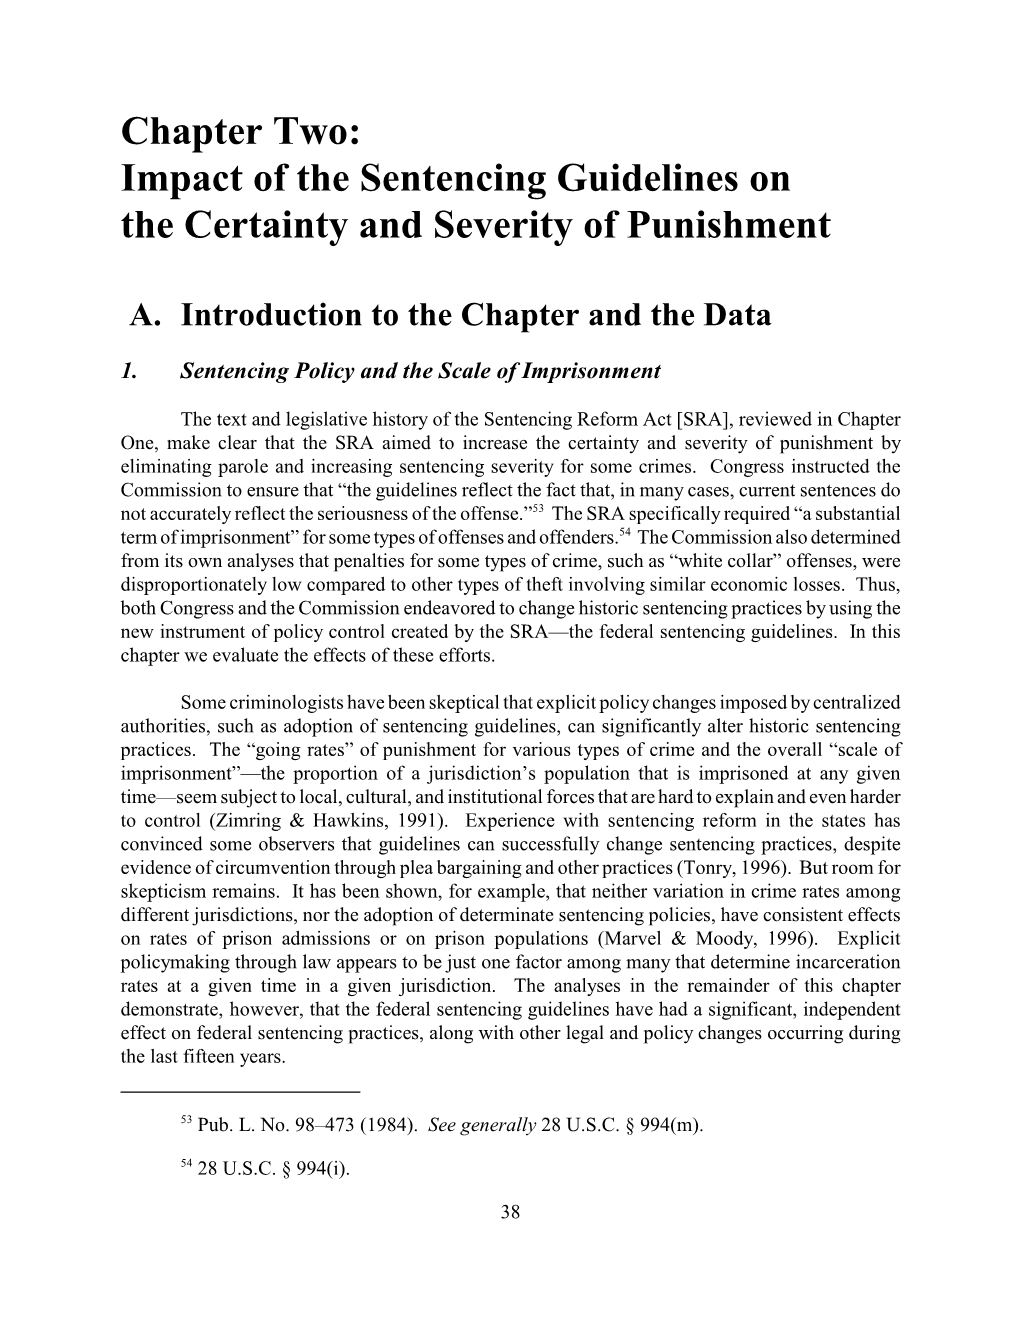 Chapter Two: Impact of the Sentencing Guidelines on the Certainty and Severity of Punishment